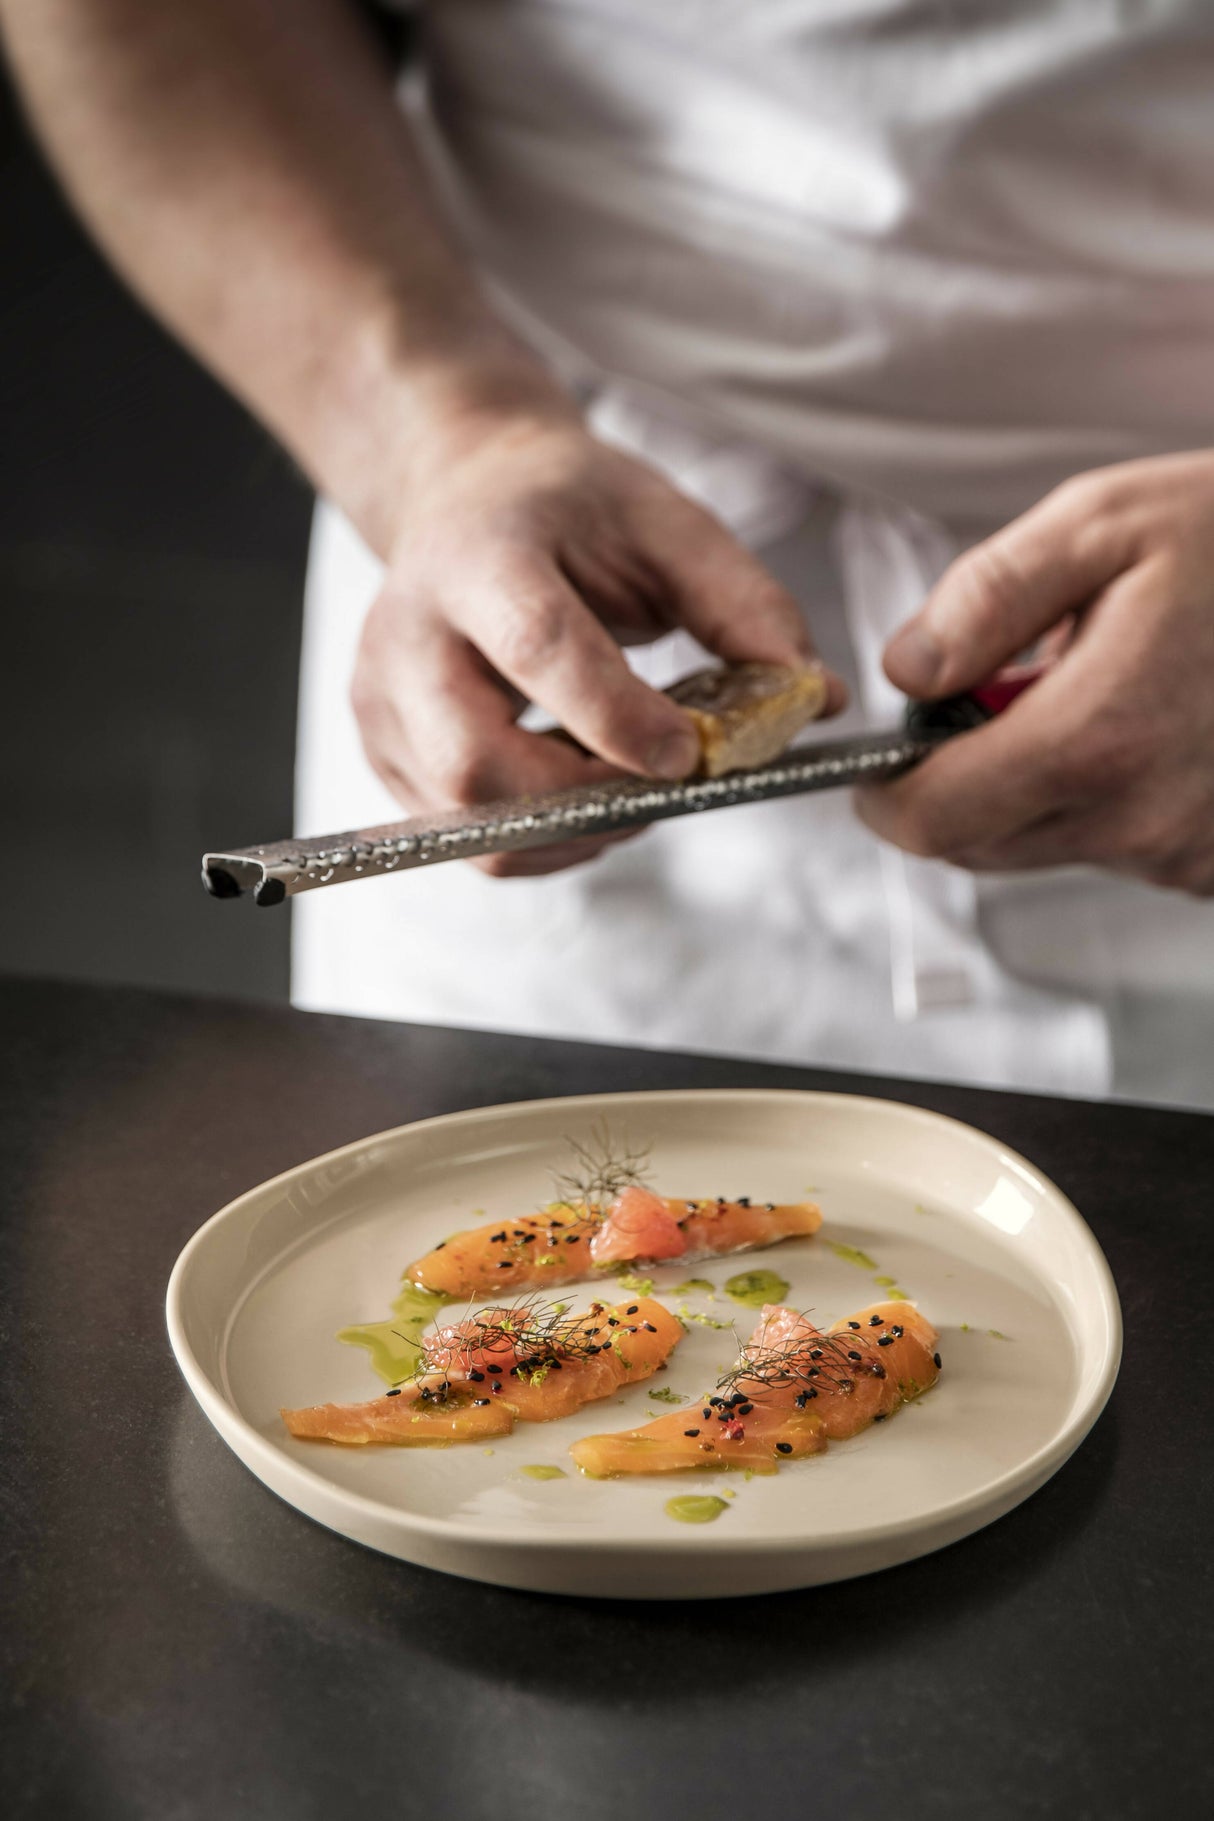 A chef serving a high end fish dish in a Degrenne Paris Beige plate